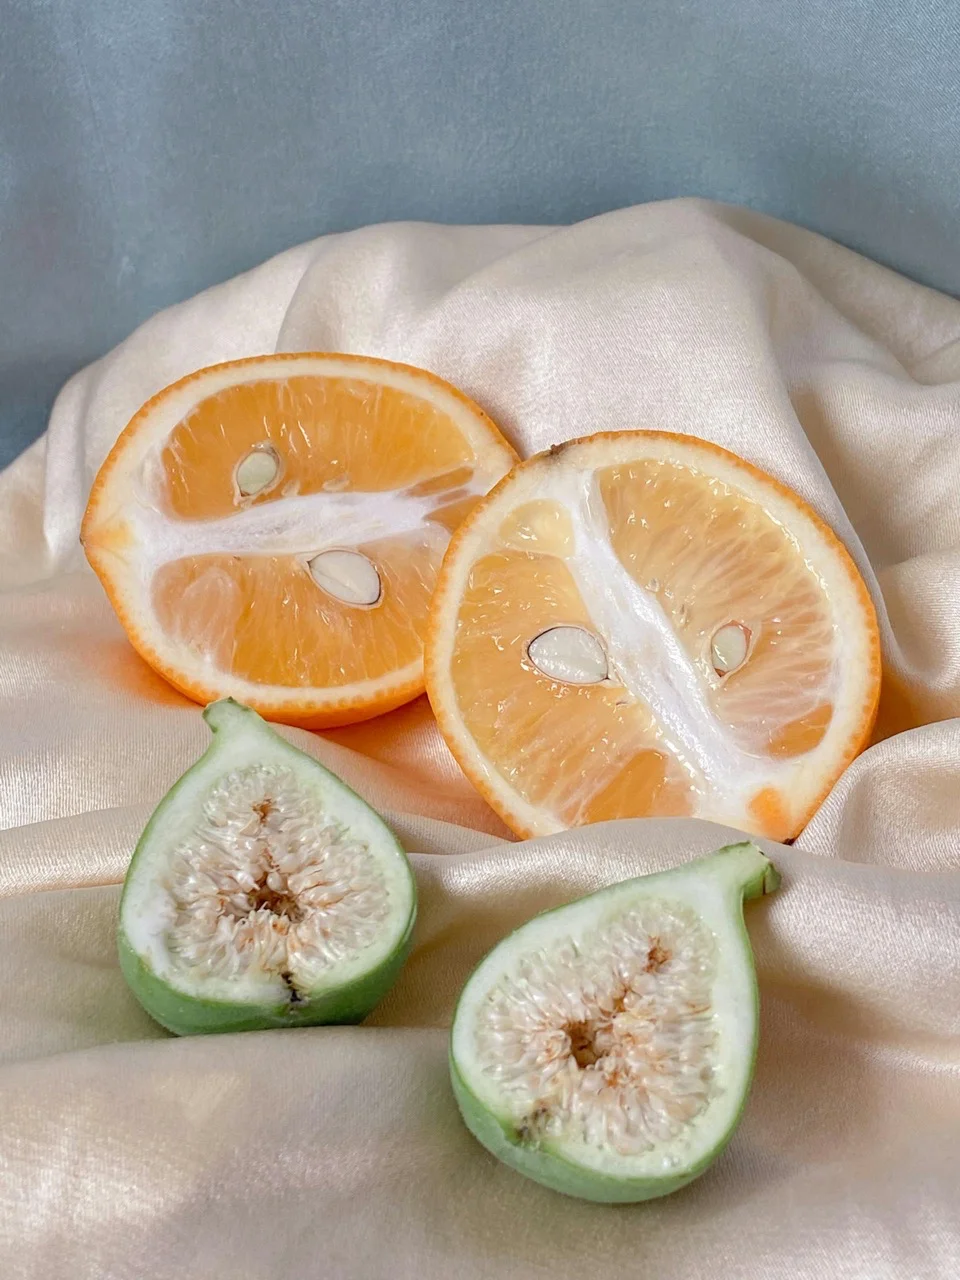 Incorporating Figs and Oranges into Your Spa Day